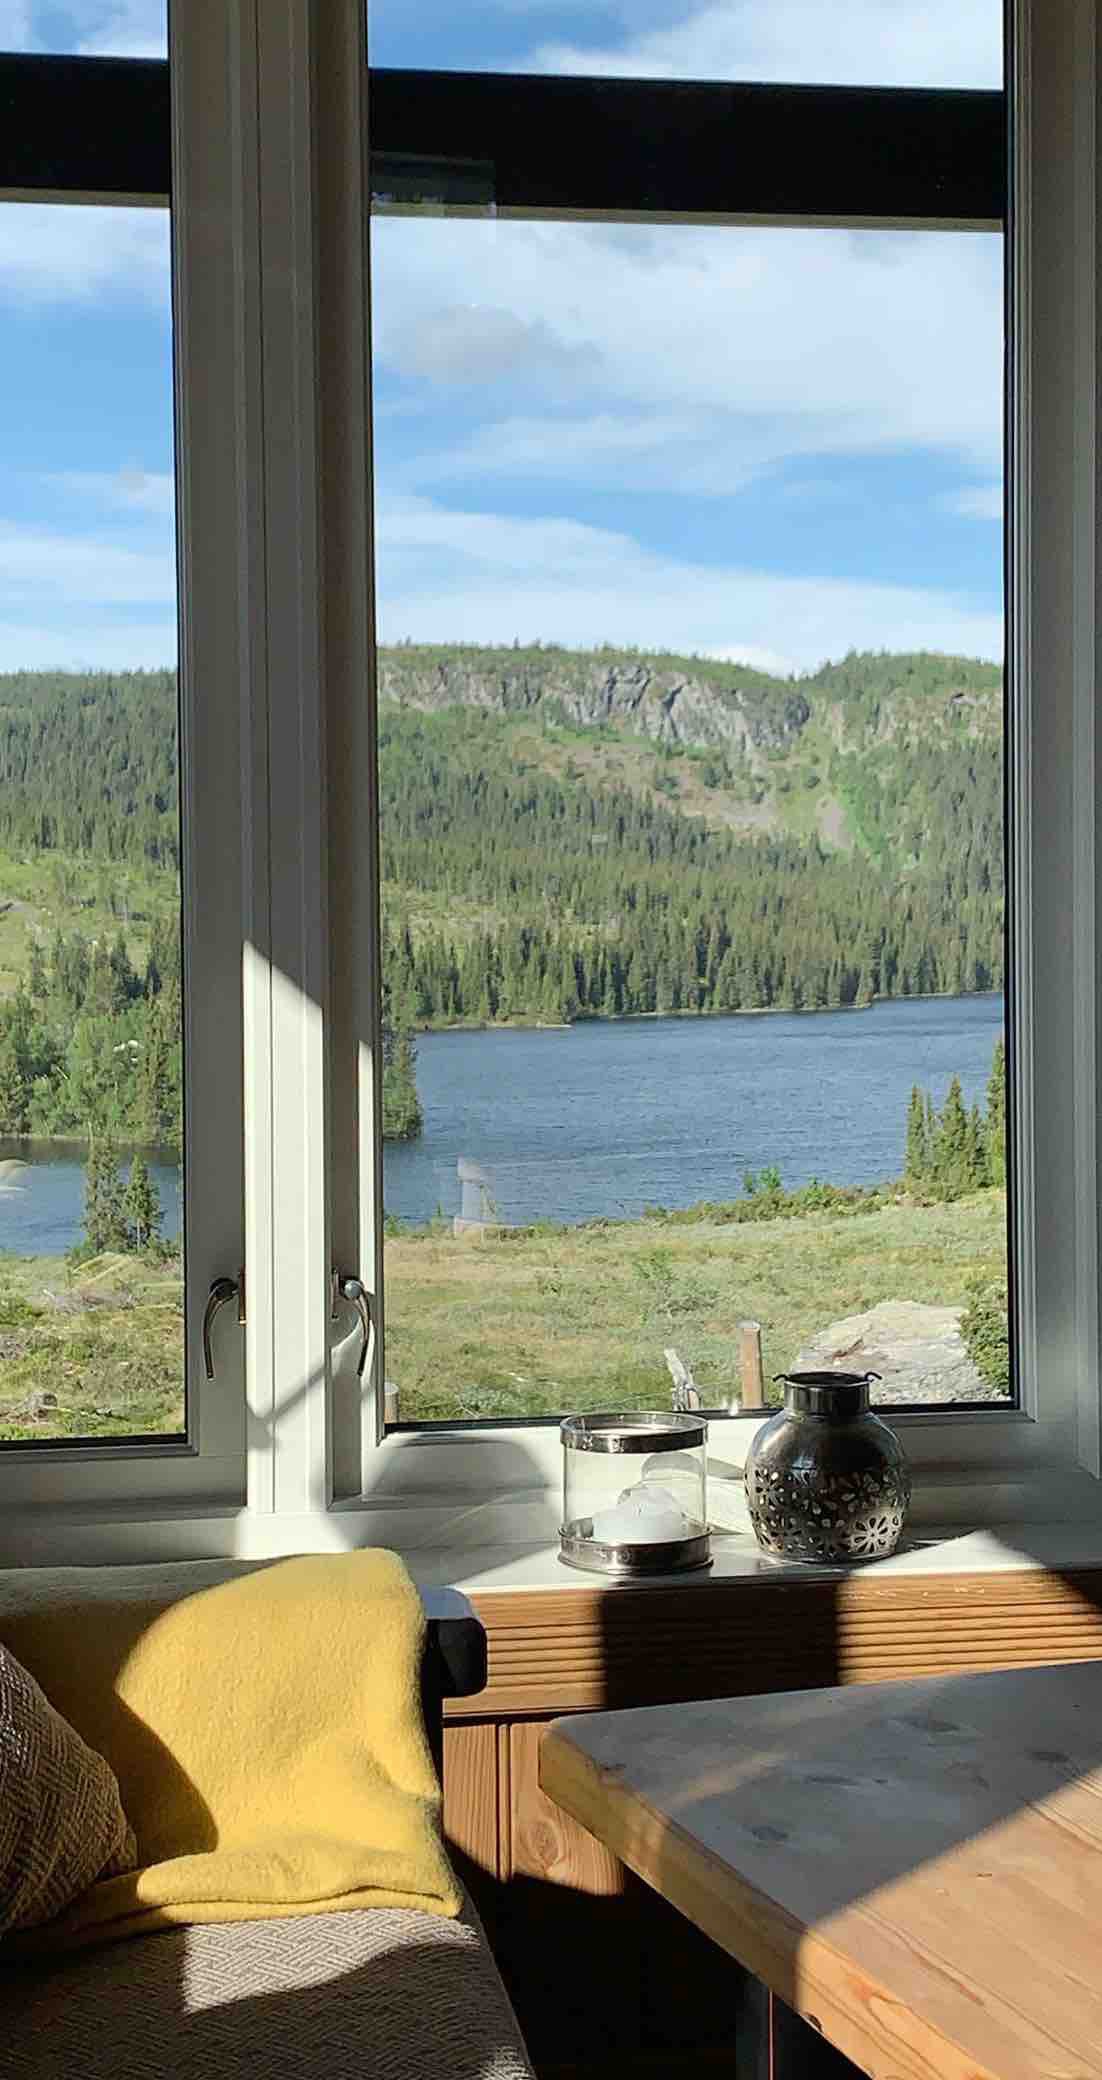 NewCabinInUnicMontain, silent, natural pearl.Norway.